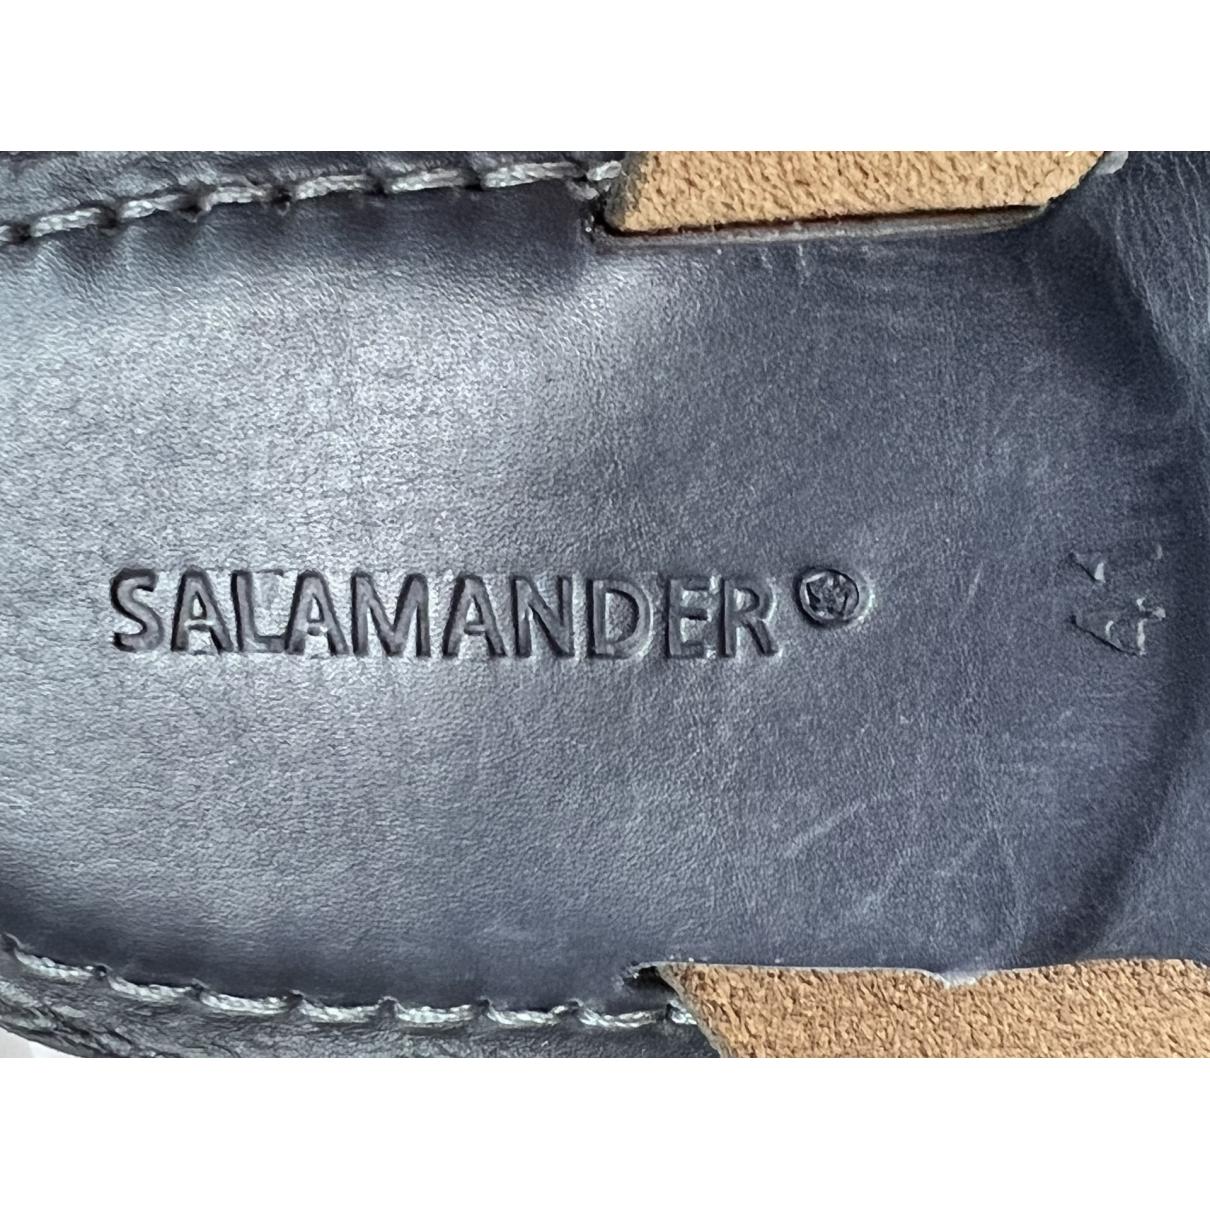 Leather SALAMANDER 22557086 Leather size in sandals Navy - EU 41